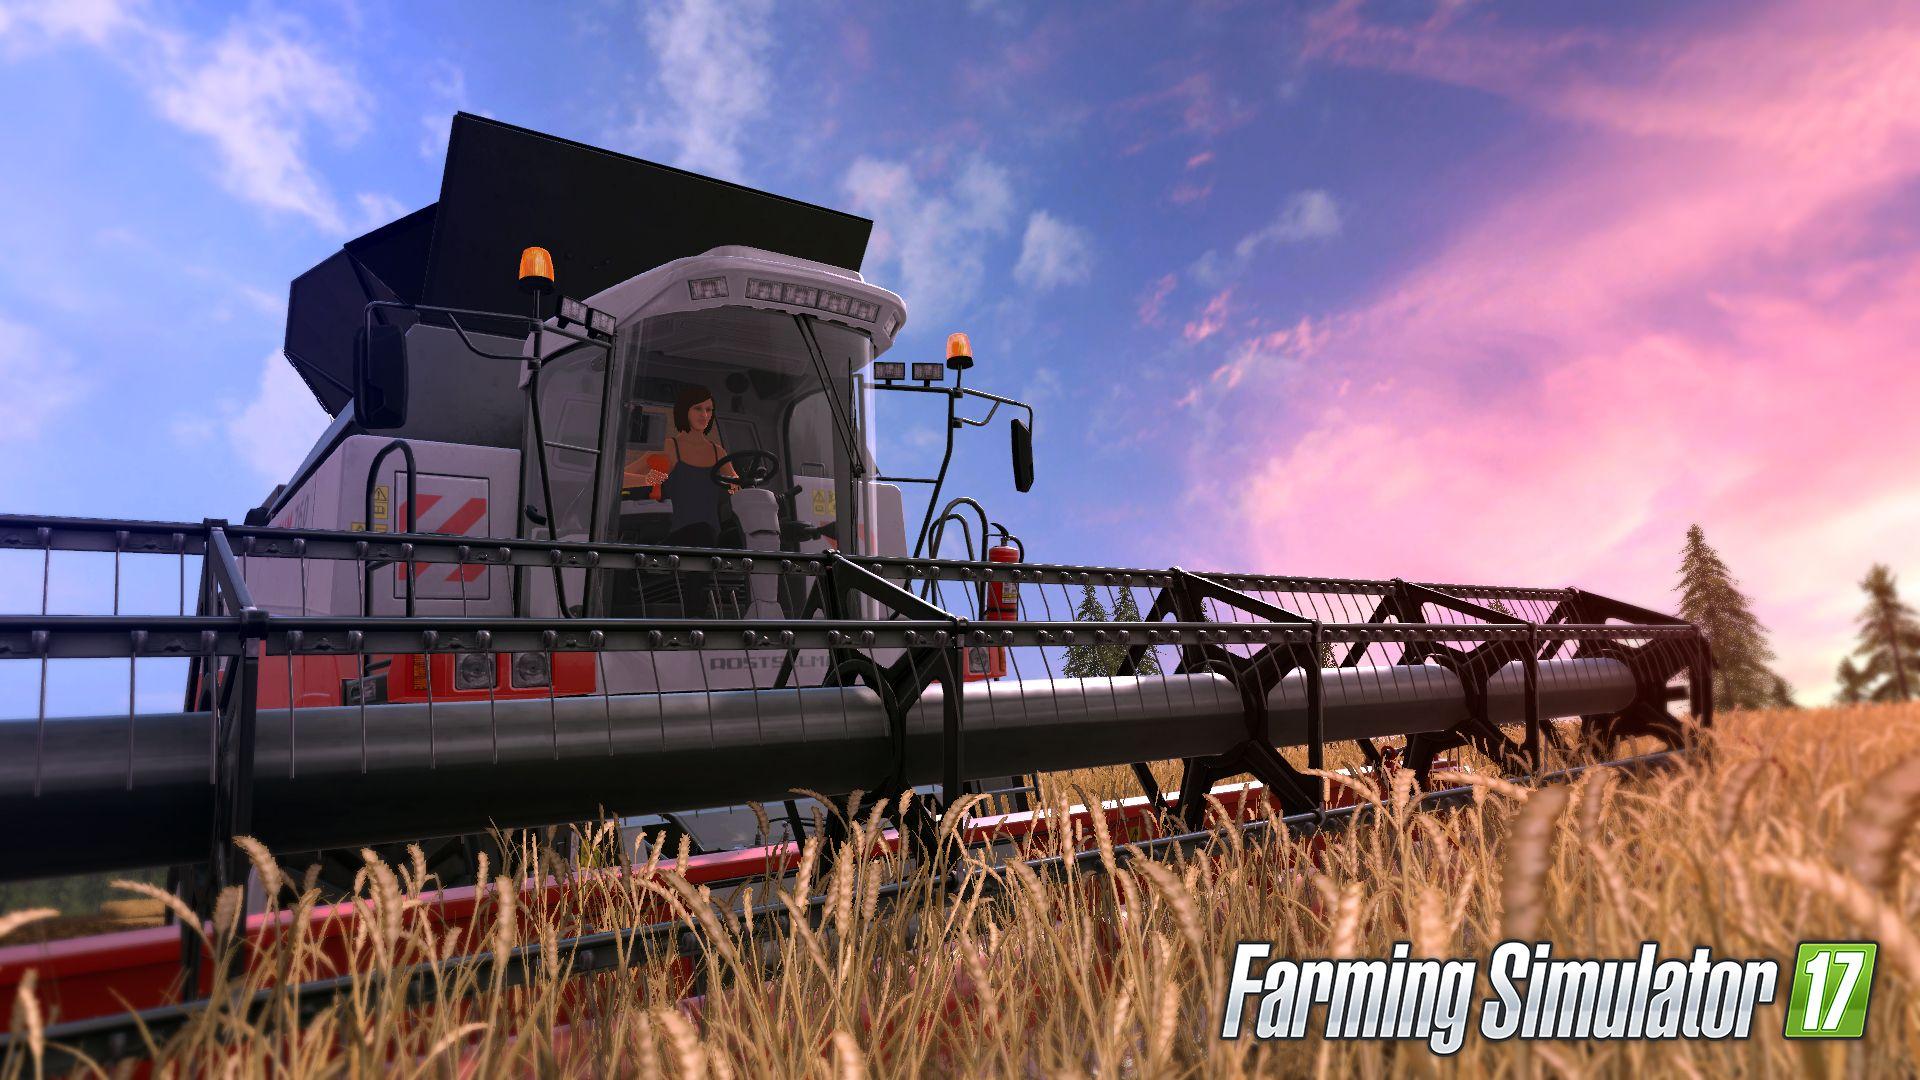 Farming Simulator 17 Will be the First Game to bring Mod Support to